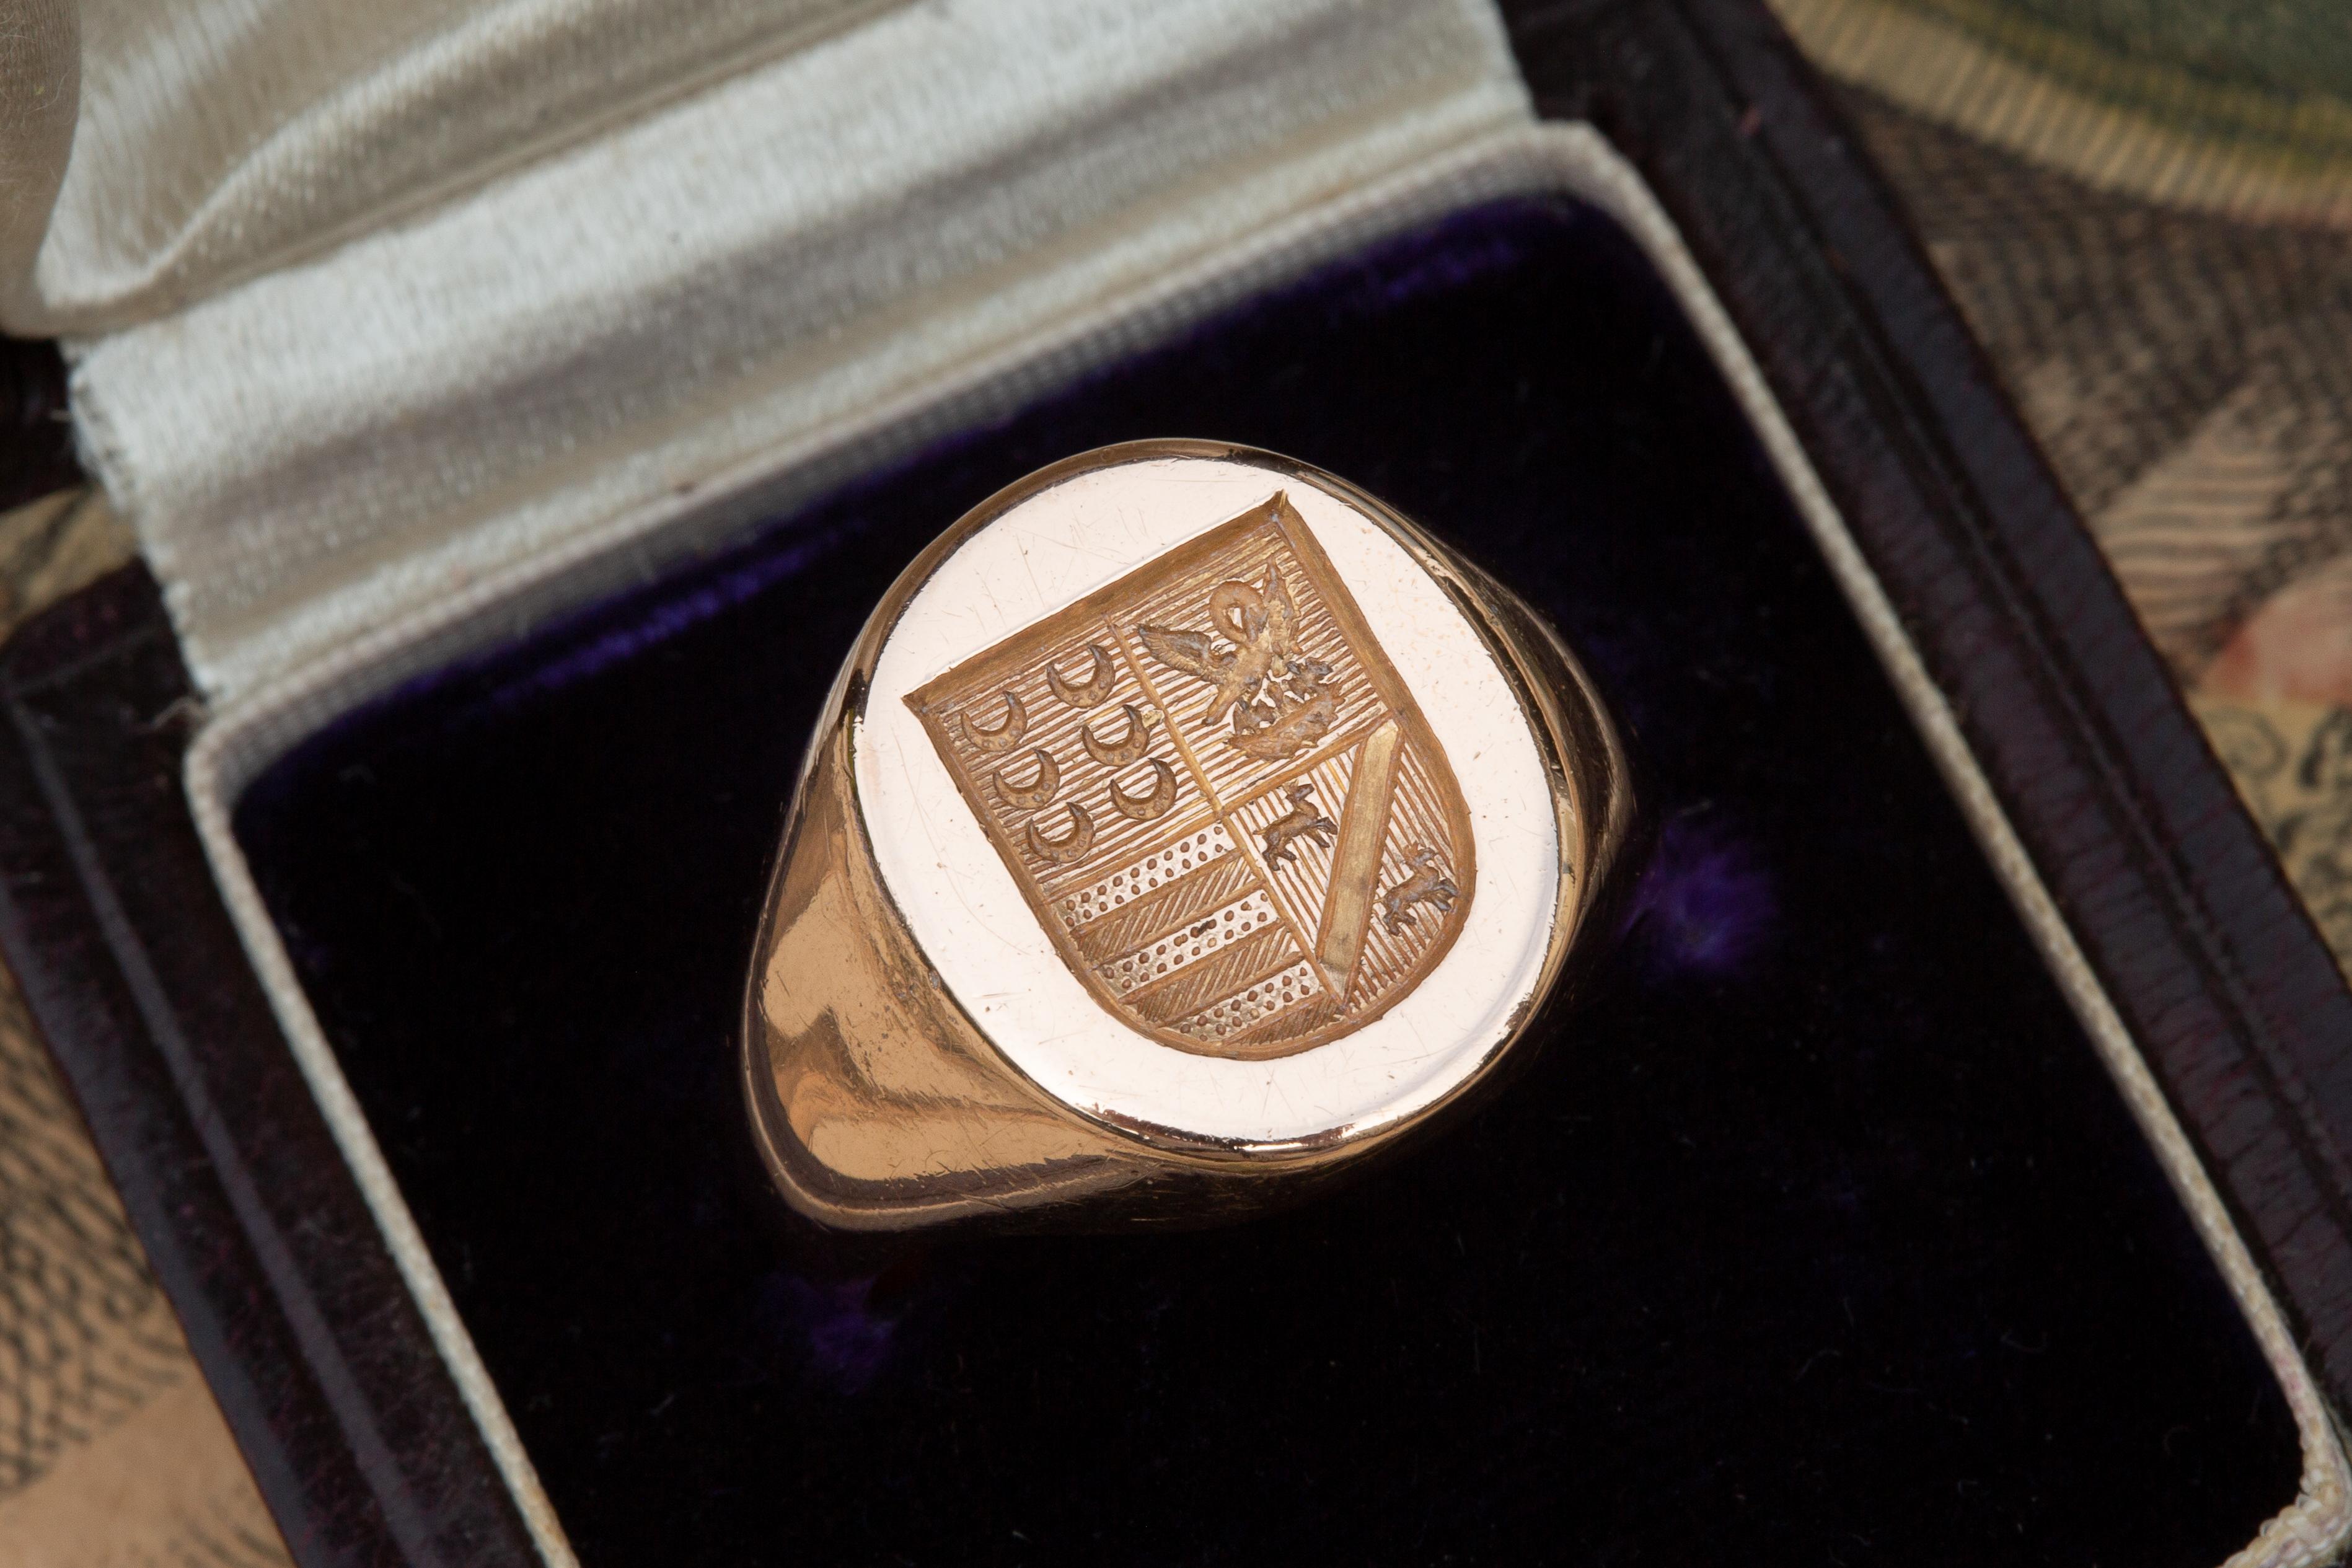 Antique French Heavy 18K Gold Coat of Arms Intaglio Signet Ring

Superb engraved intaglio signet ring made in France circa 1900. It weighs an impressive 18 grams of 18K rose gold. The heraldic family coat of arms is intricately carved and in the